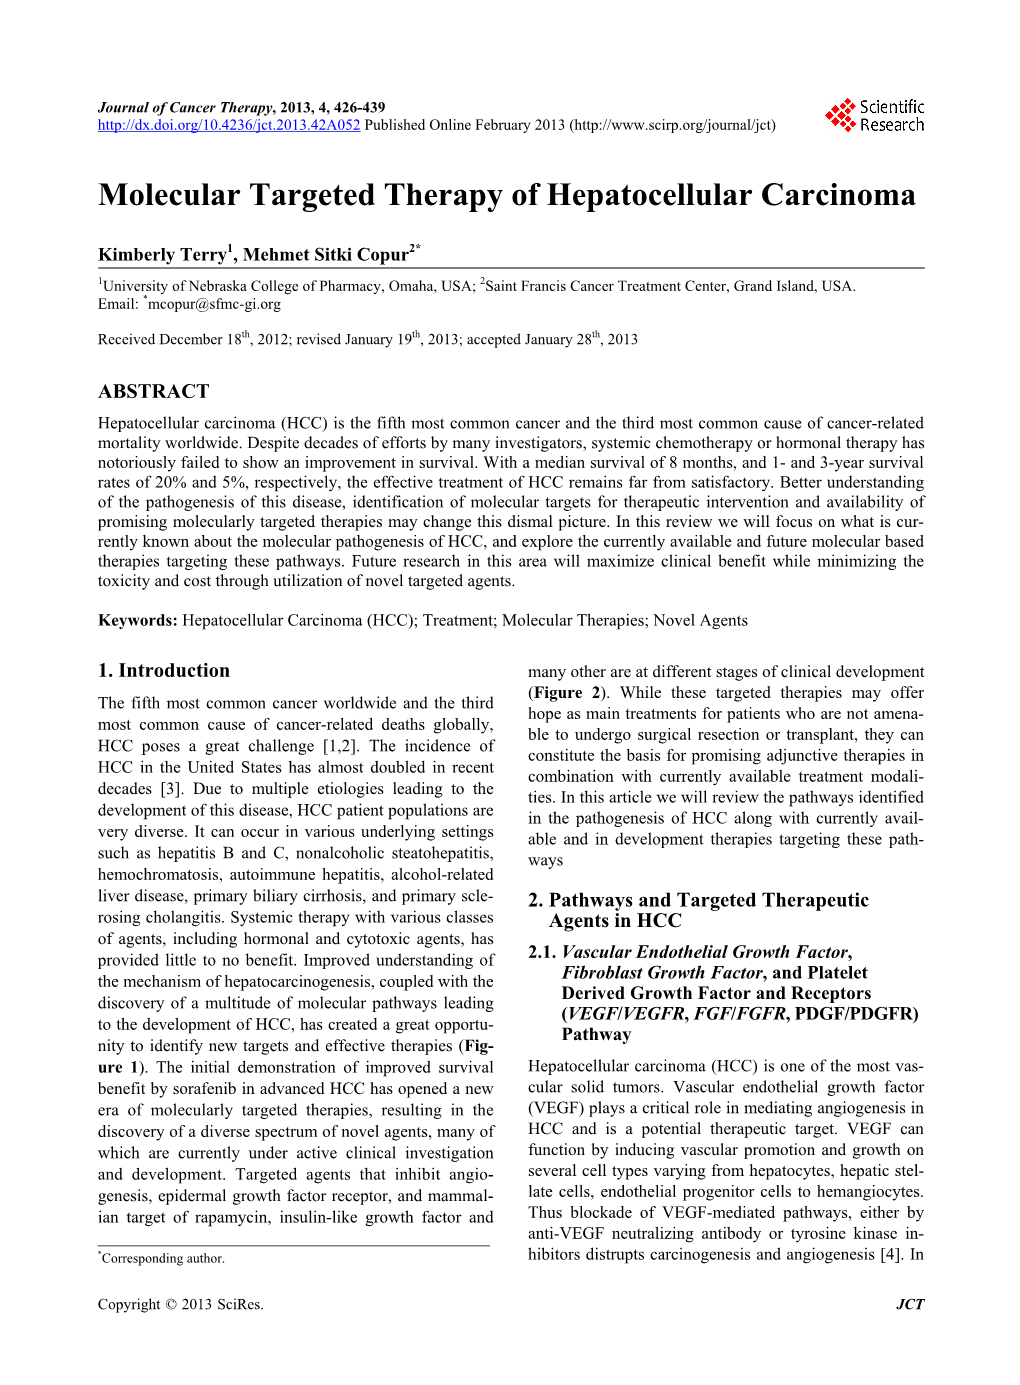 Molecular Targeted Therapy of Hepatocellular Carcinoma